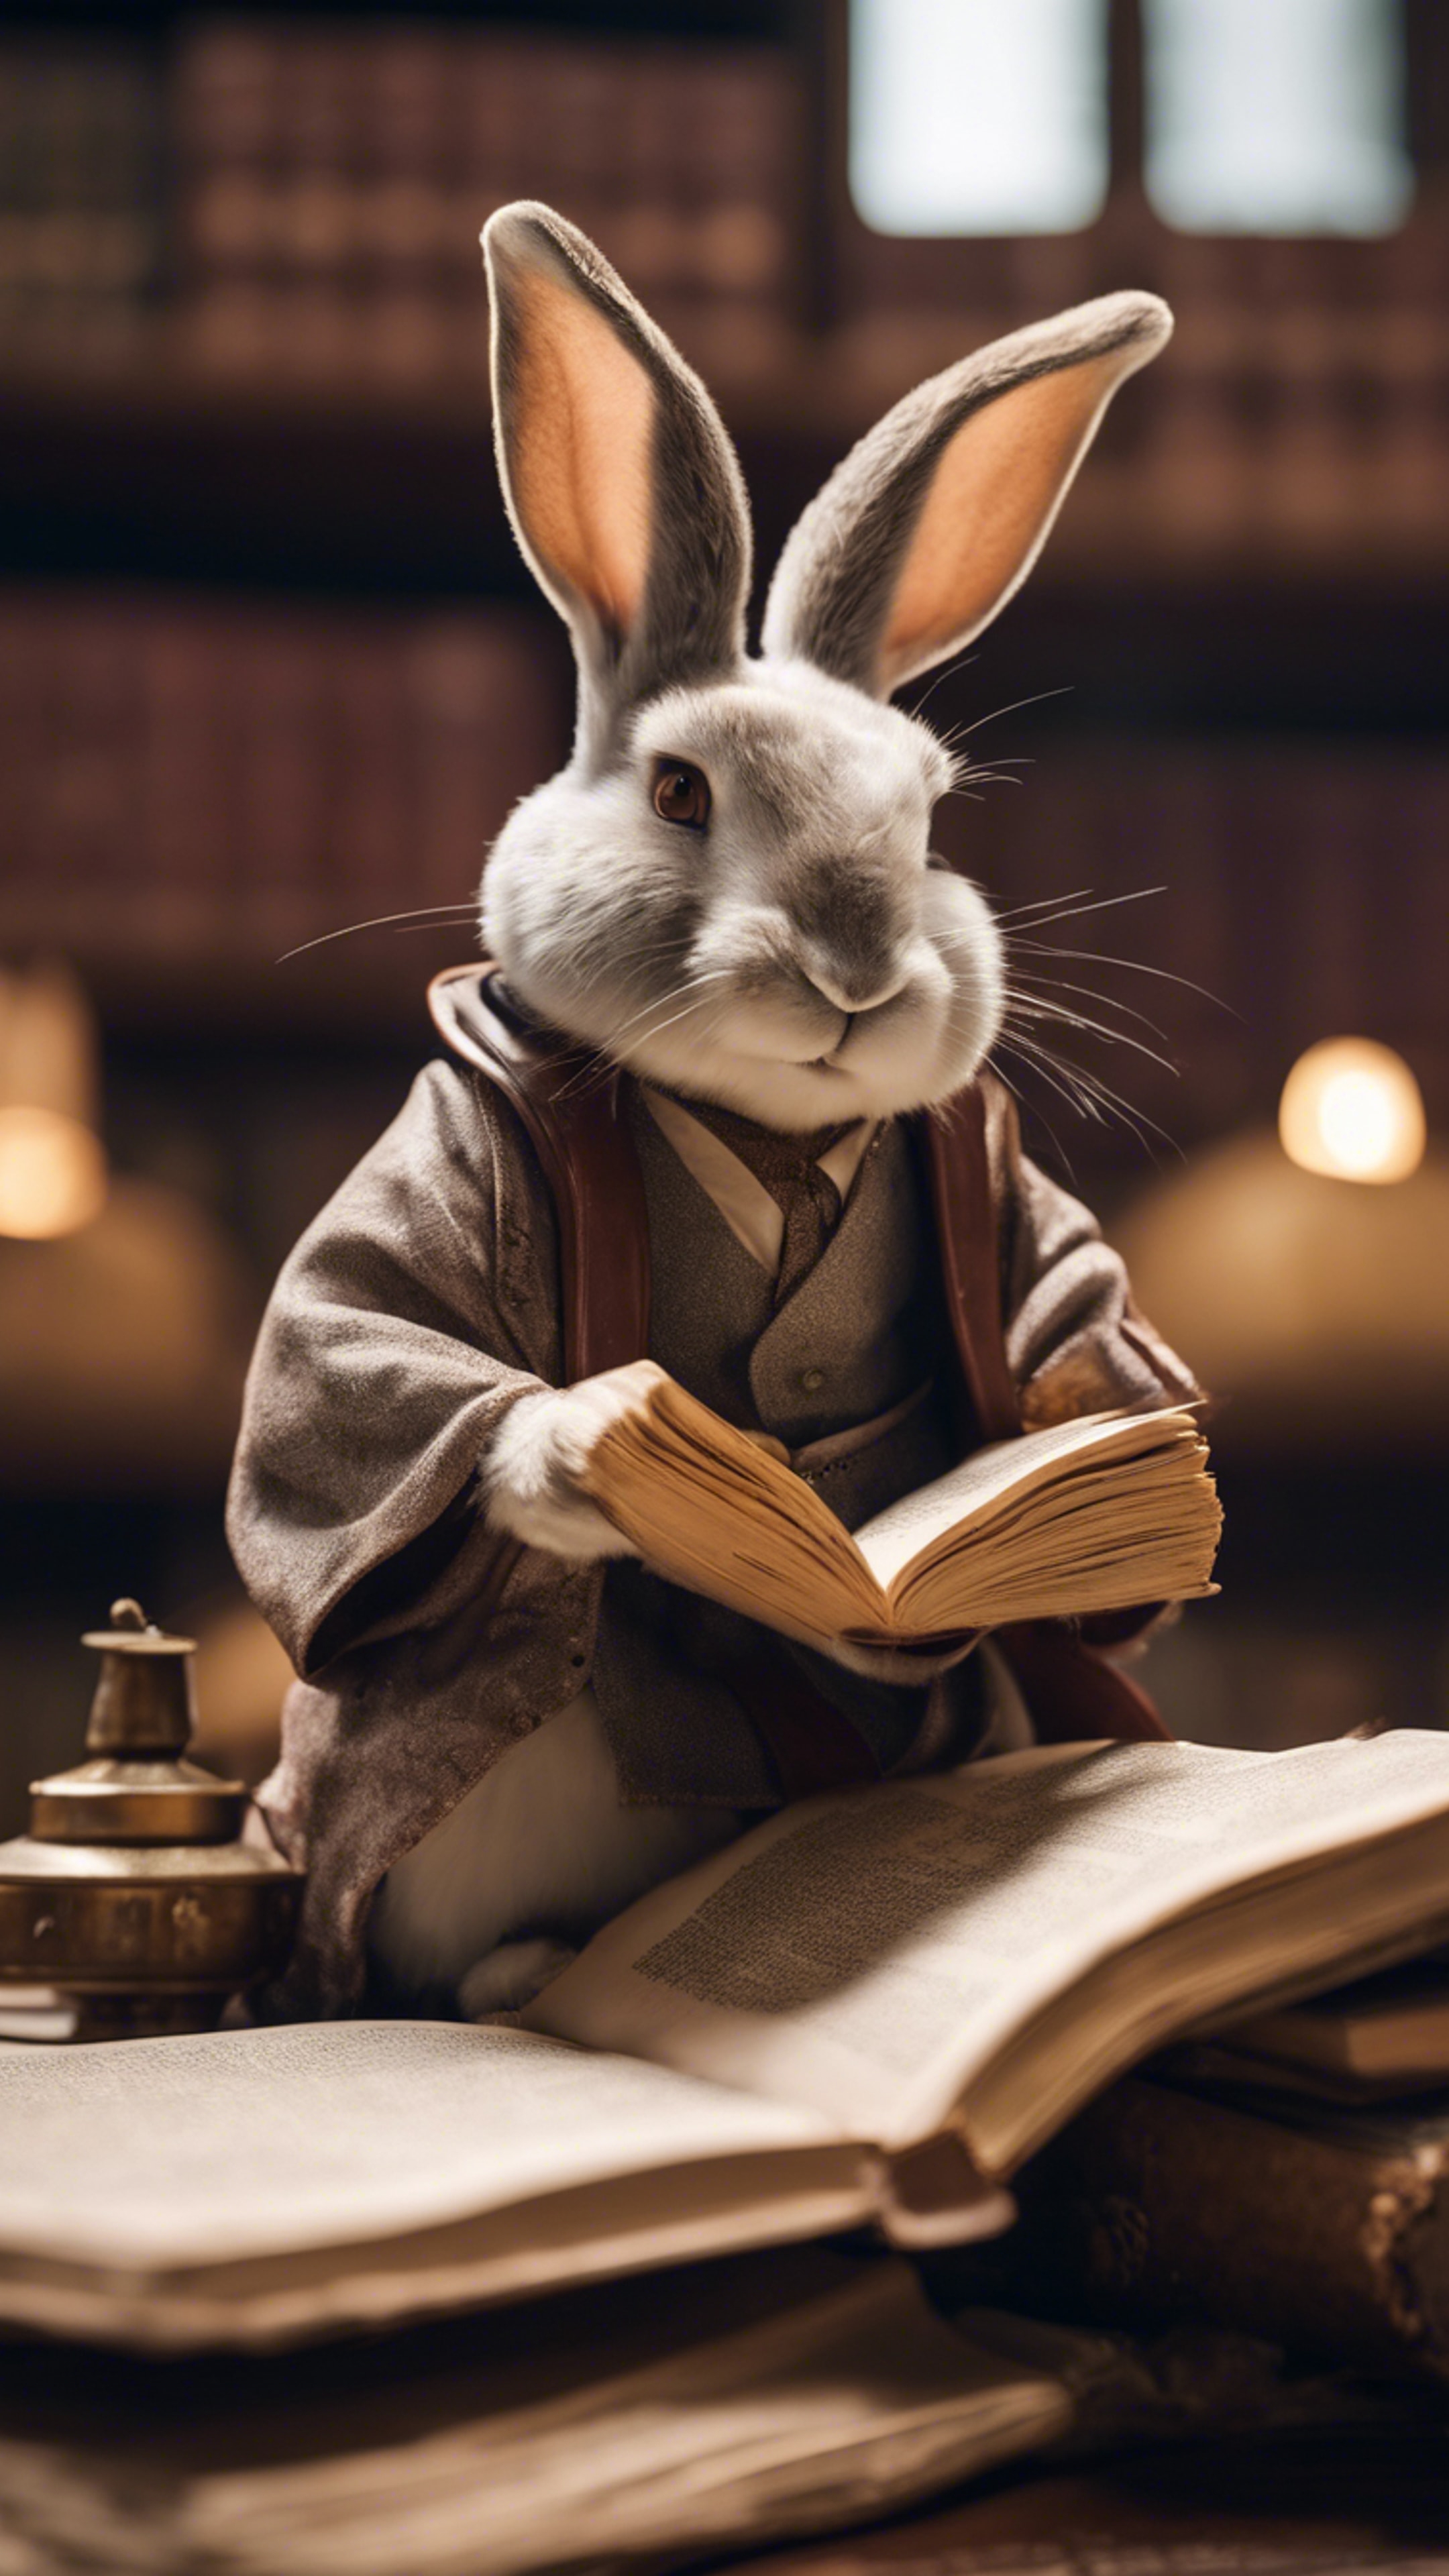 An old scholar rabbit poring over sacred texts in an ancient library.壁紙[17d2cb5d877b429da6a2]